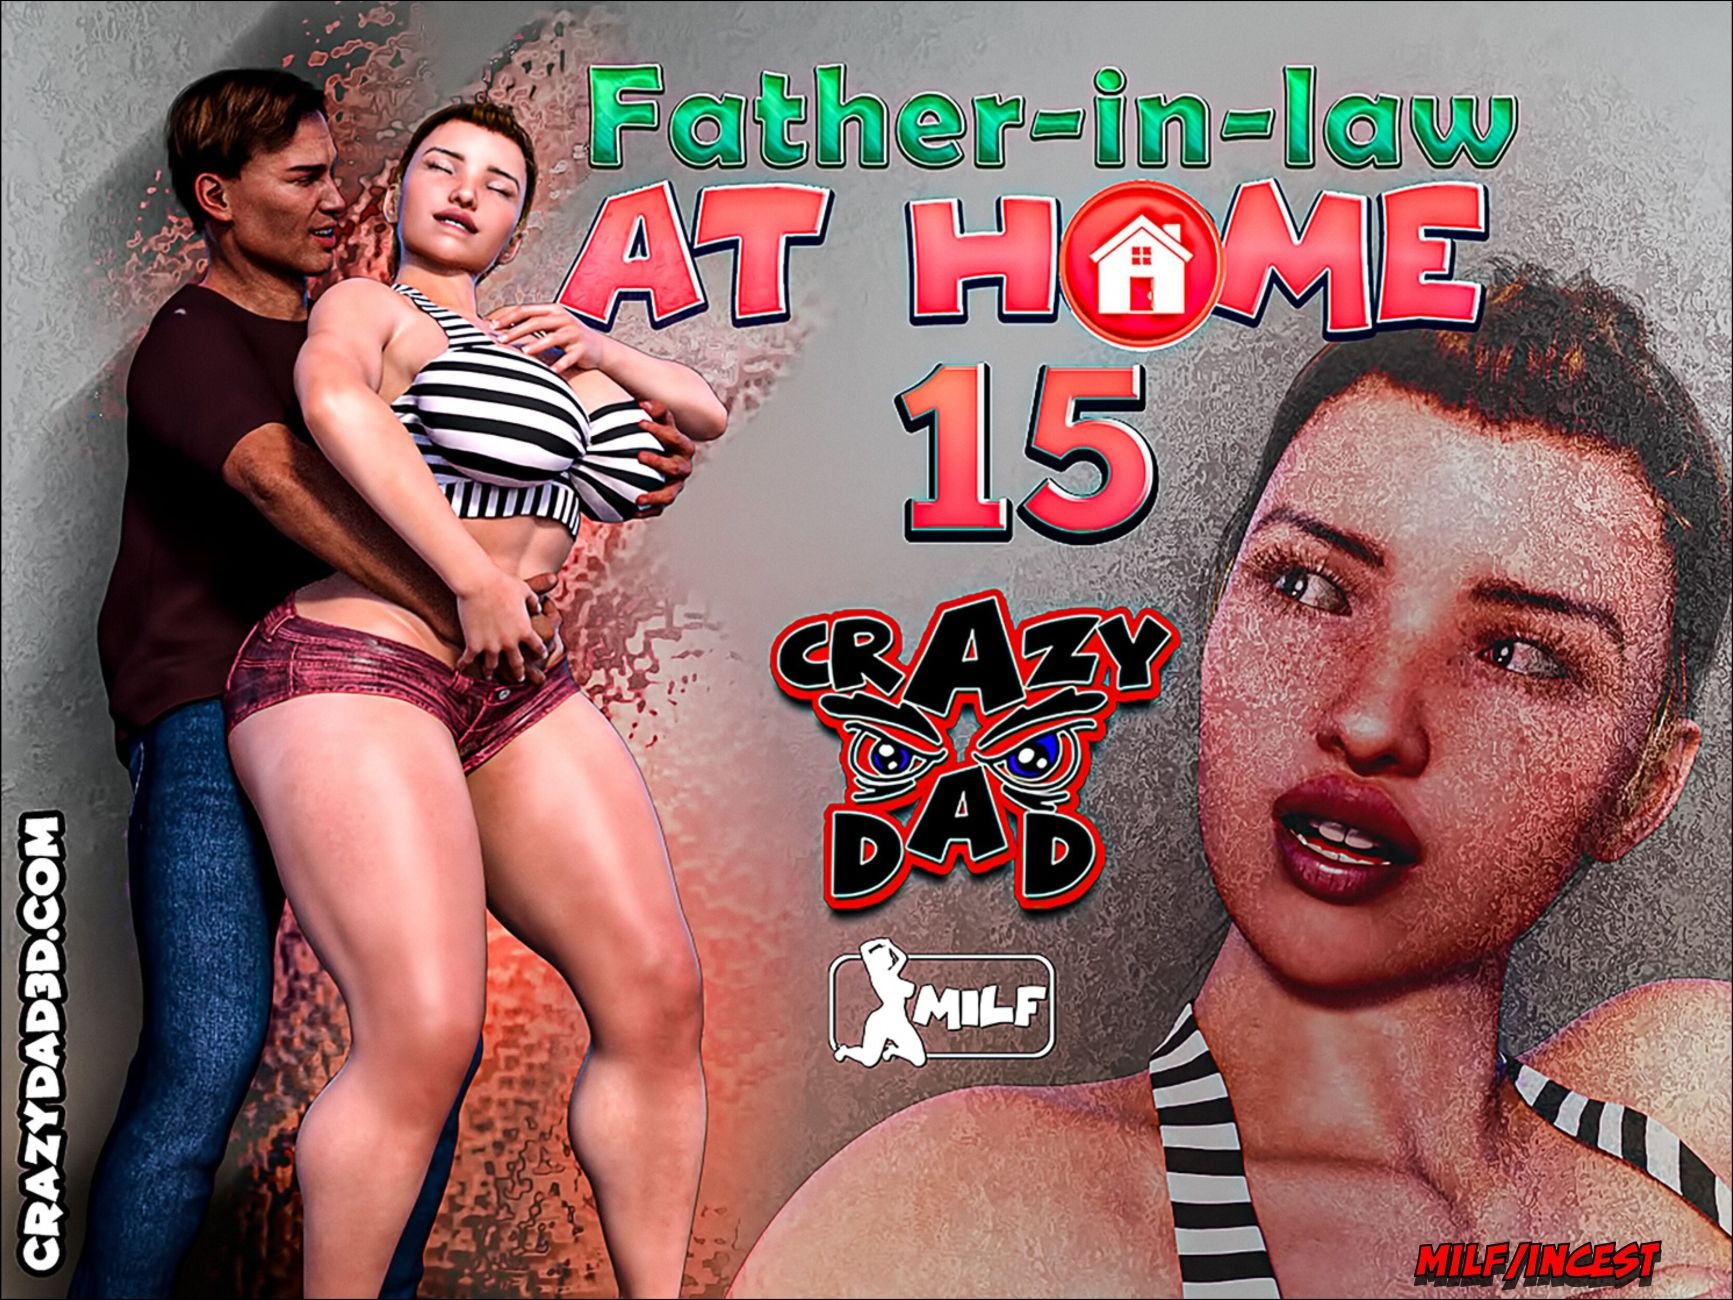 Crazy Dad 3d – Father-in-law at home 15